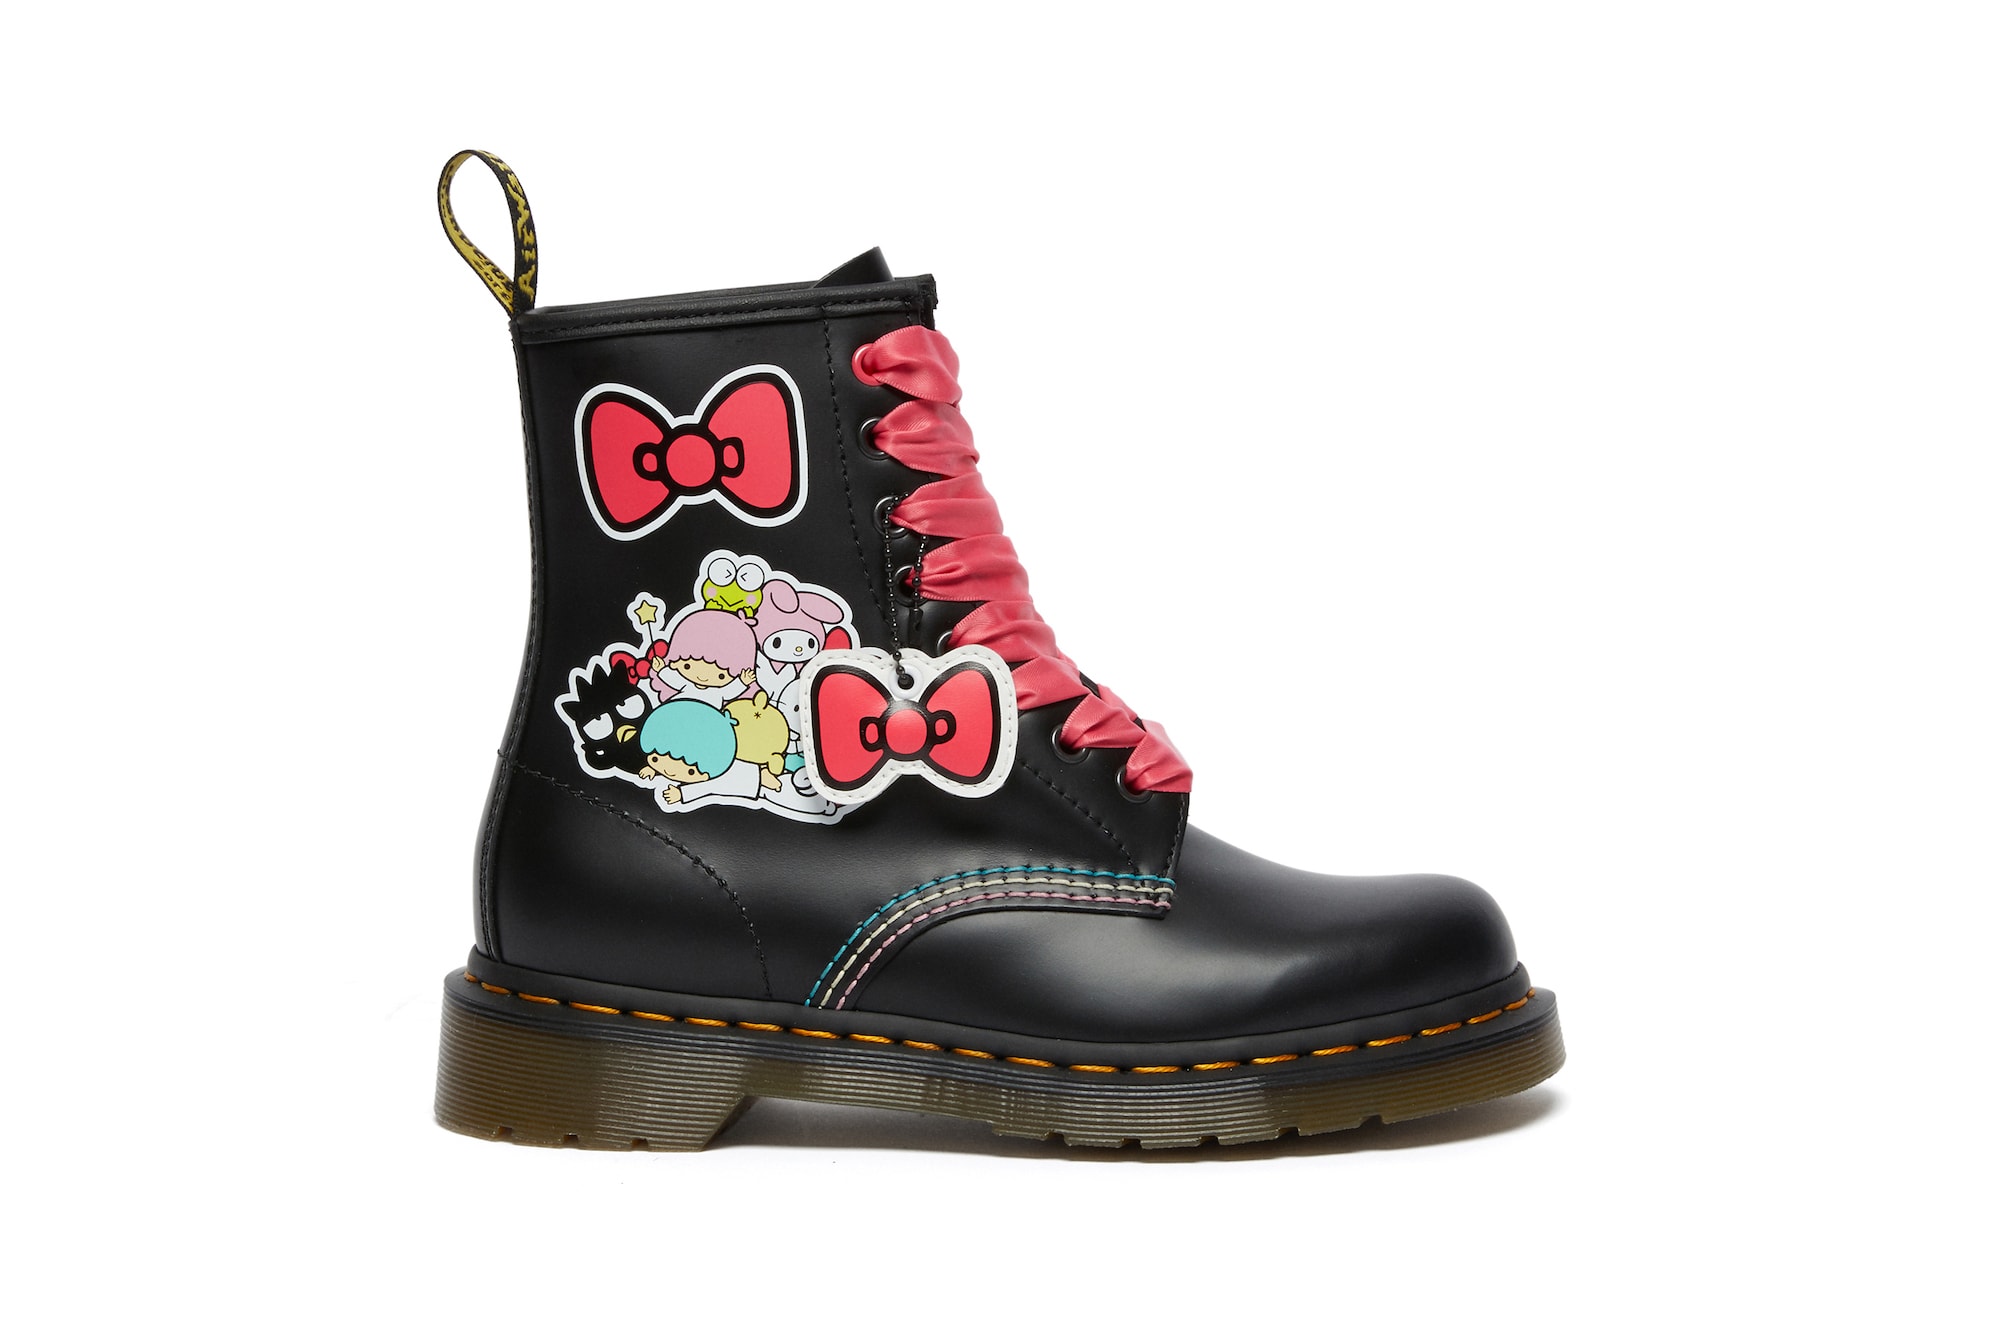 Dr. Martens x Sanrio Hello Kitty and Friends Release Leather Boots Keroppi My Melody Badtz-Maru